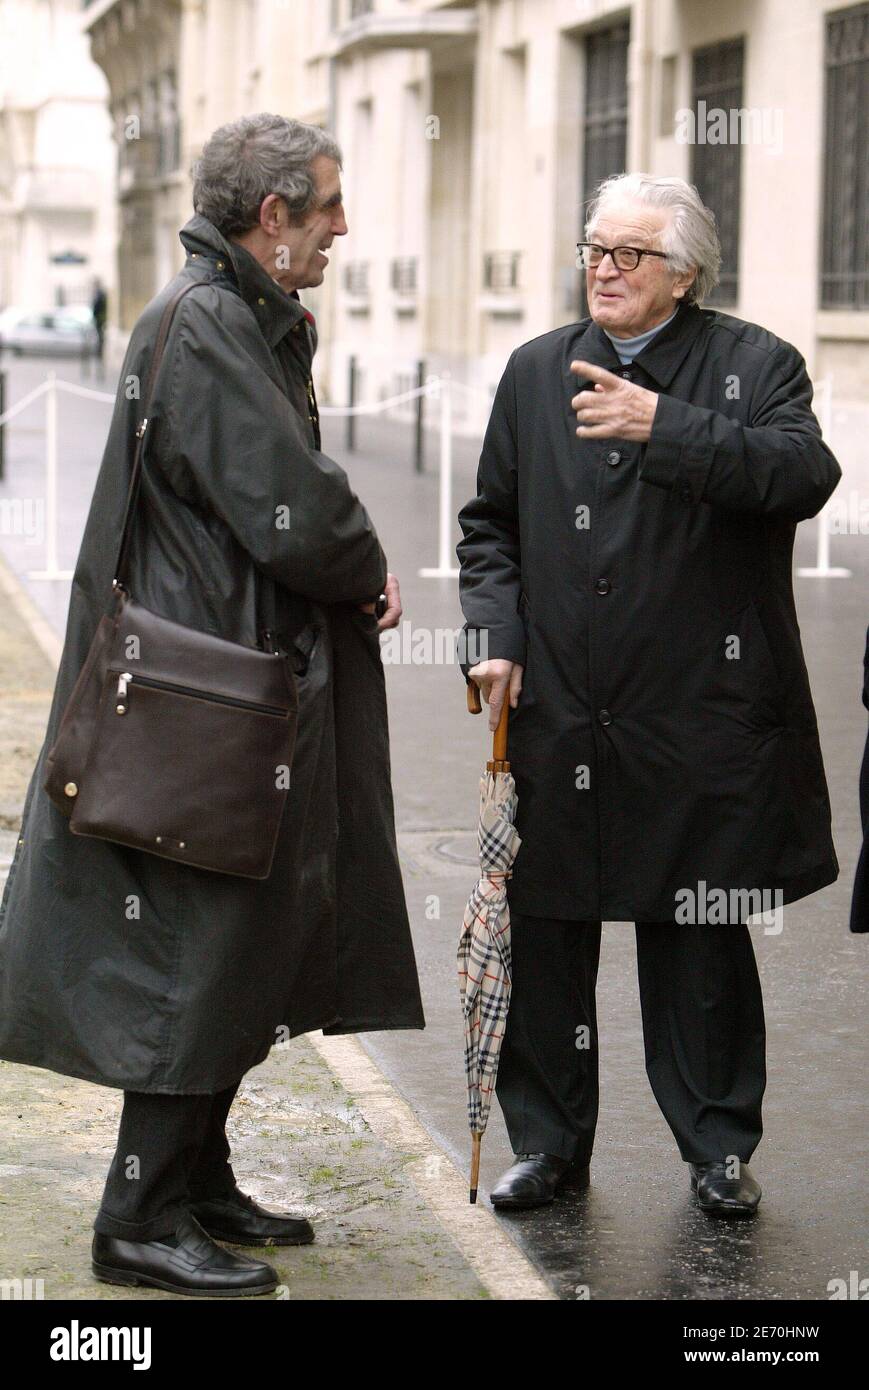 Jean-Pierre Tarot, former doctor of Francois Mitterrand and Roland Dumas  attend the 11th anniversary of former president Francois Mitterrand's death  by unveiling a plaque in Paris, France, on January 8, 2007. Photo